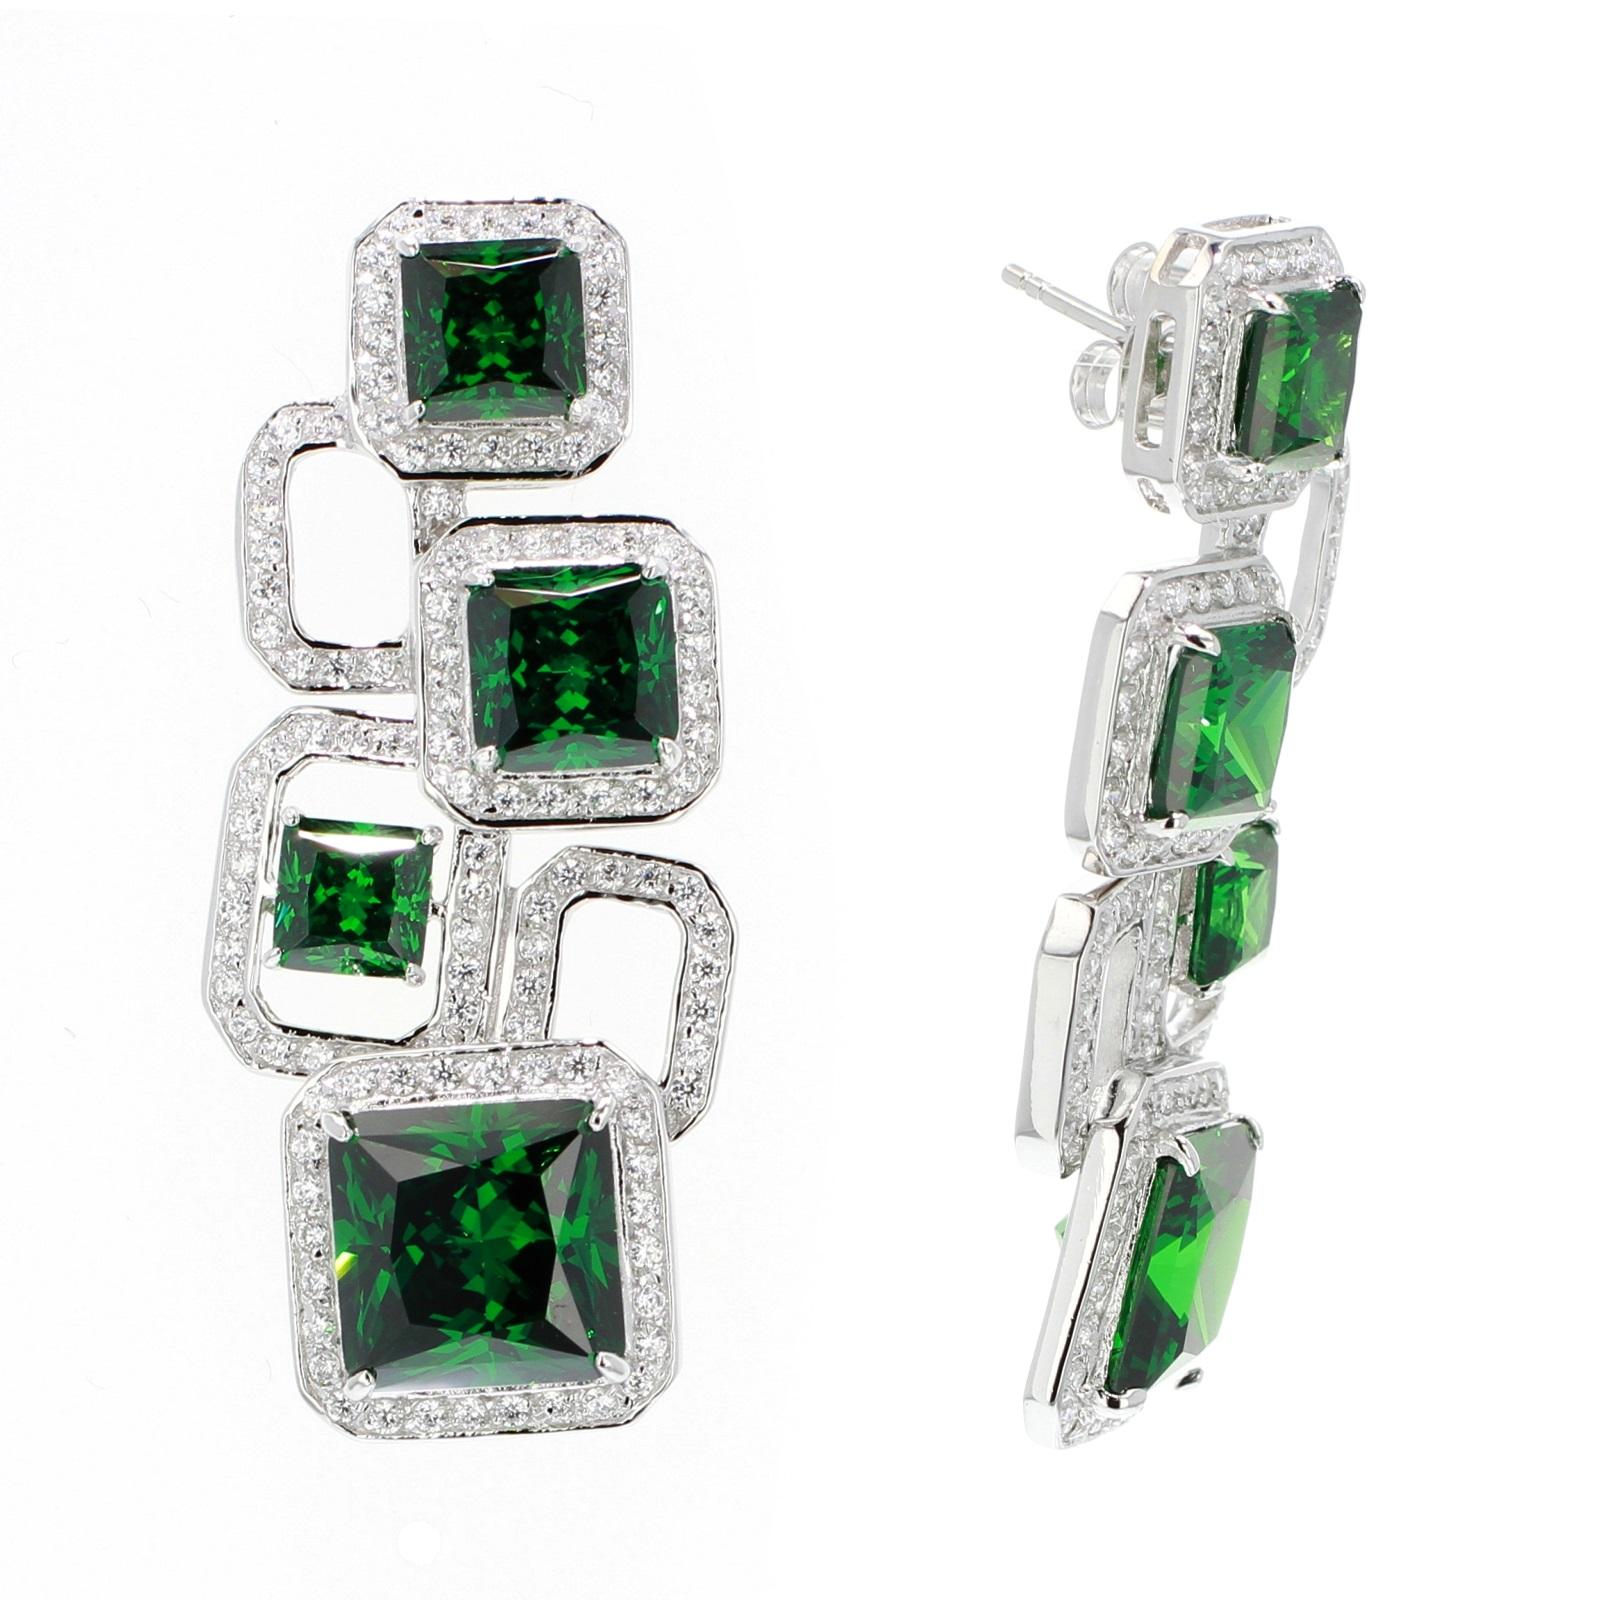 Siledium Silver White and Emerald Color Earrings by Feri For Sale